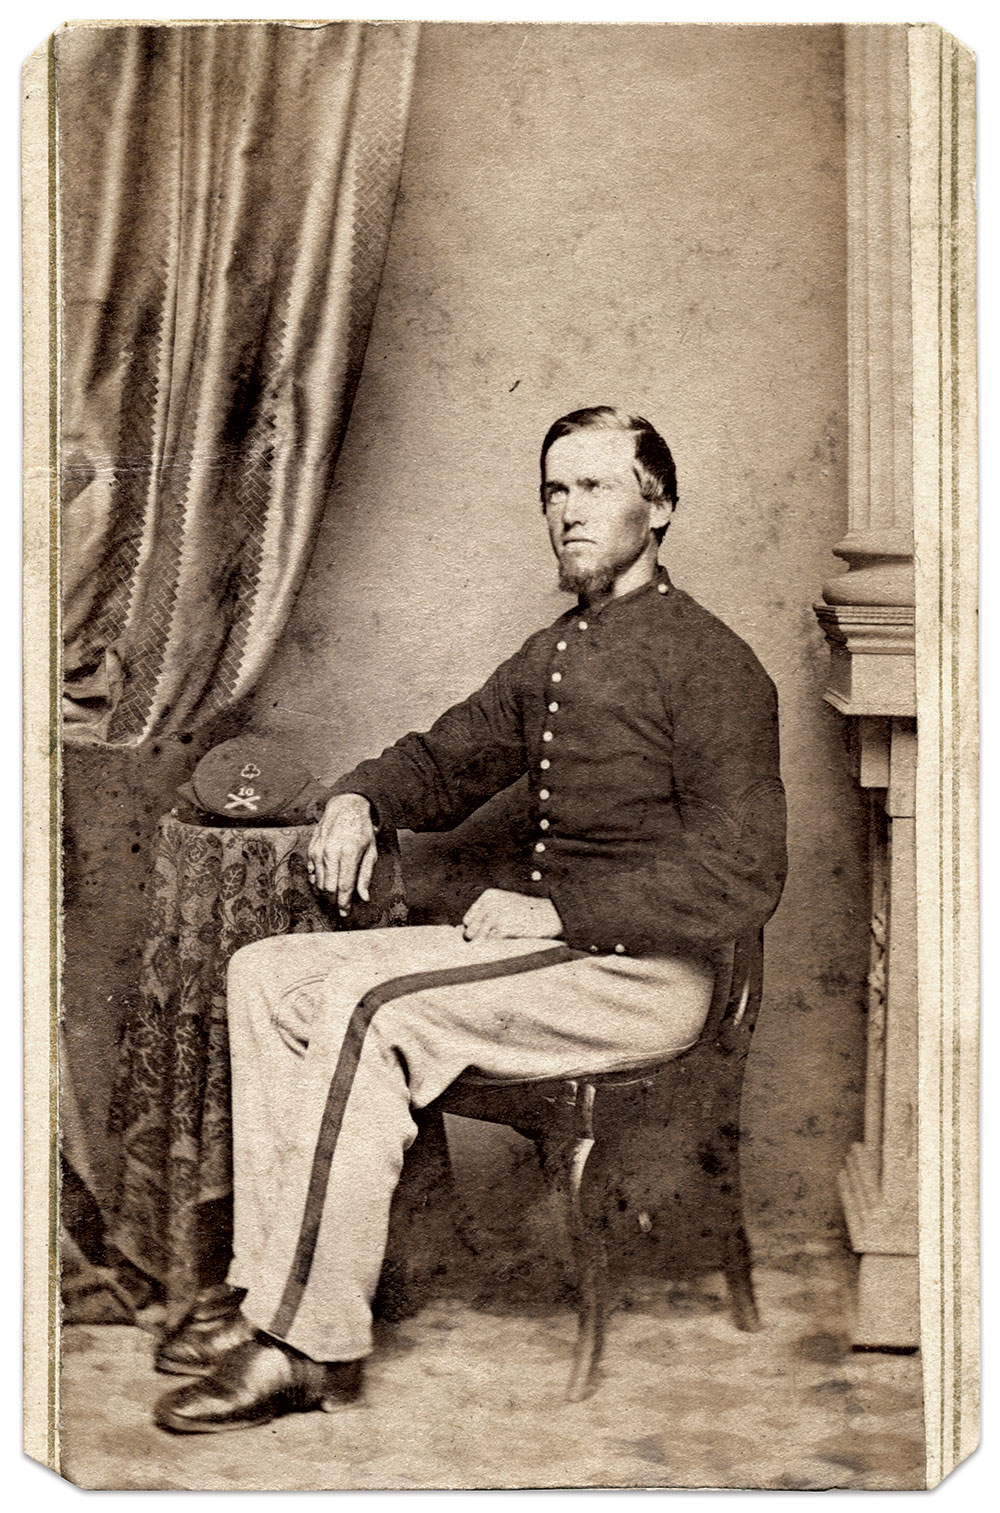 Billings probably sat for this portrait at the time of his muster out of the 10th in June 1865. It is believed to be previously unpublished. Billings wears red corporal’s chevrons that appear very dark due to the nature of wet-plate photography. His cap on the table includes a 2nd Corps trefoil, the numeral 10, and the crossed cannon insignia of the artillery. Carte de visite by E. Samuels of Boston, Mass. Author’s collection.